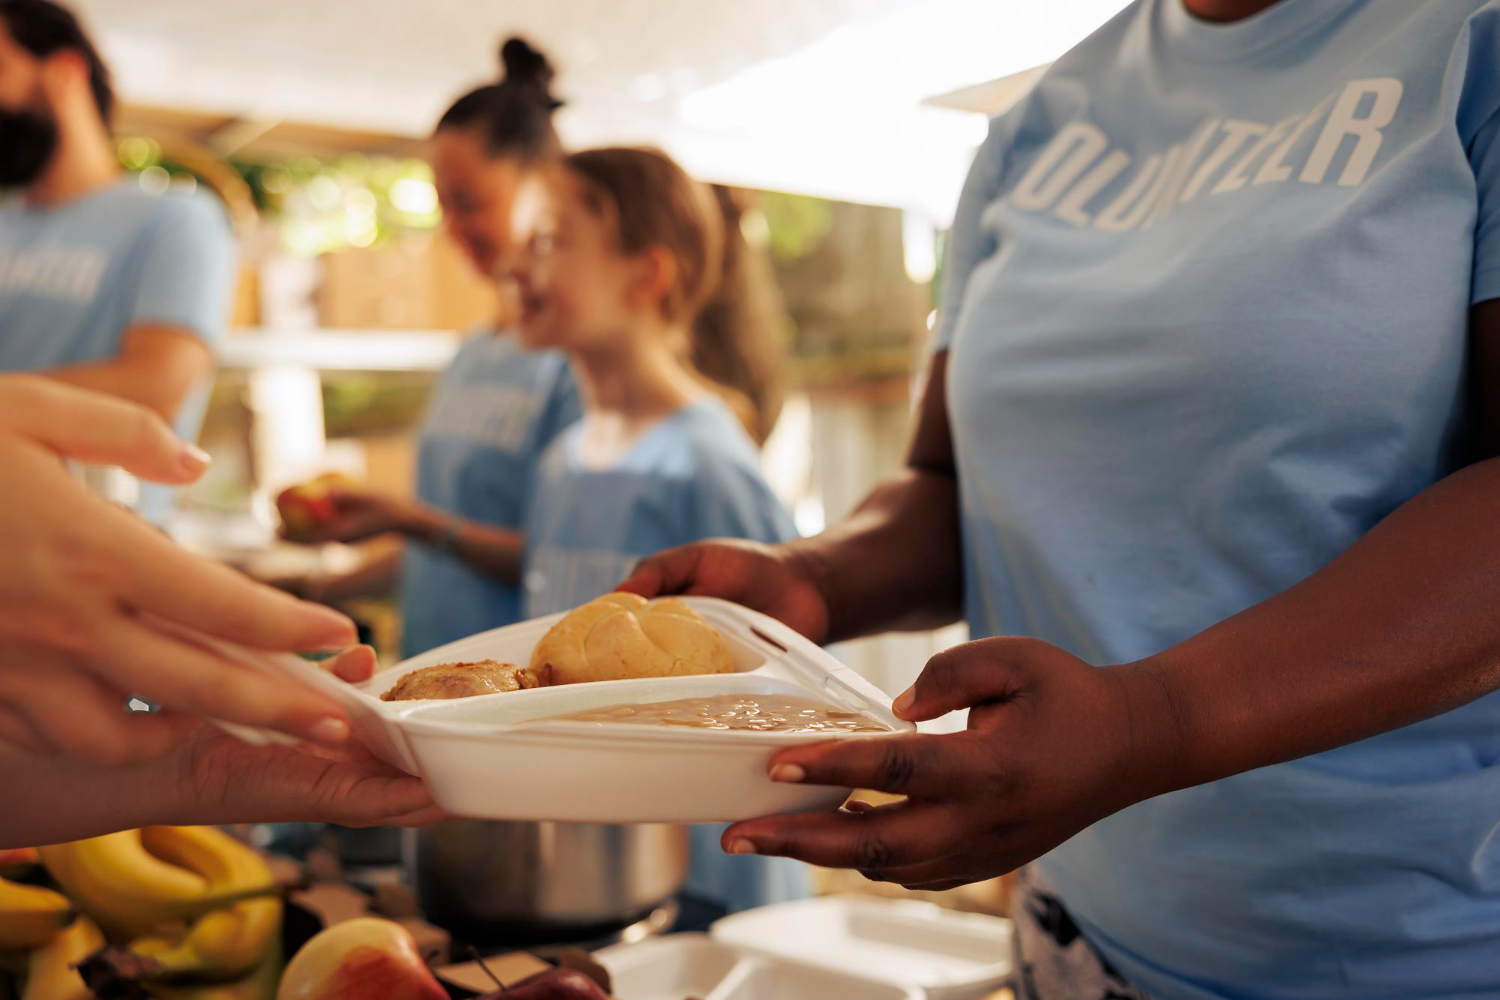 Helping feed others on Thanksgiving and any day Photo Credit DCStudio via FreePik